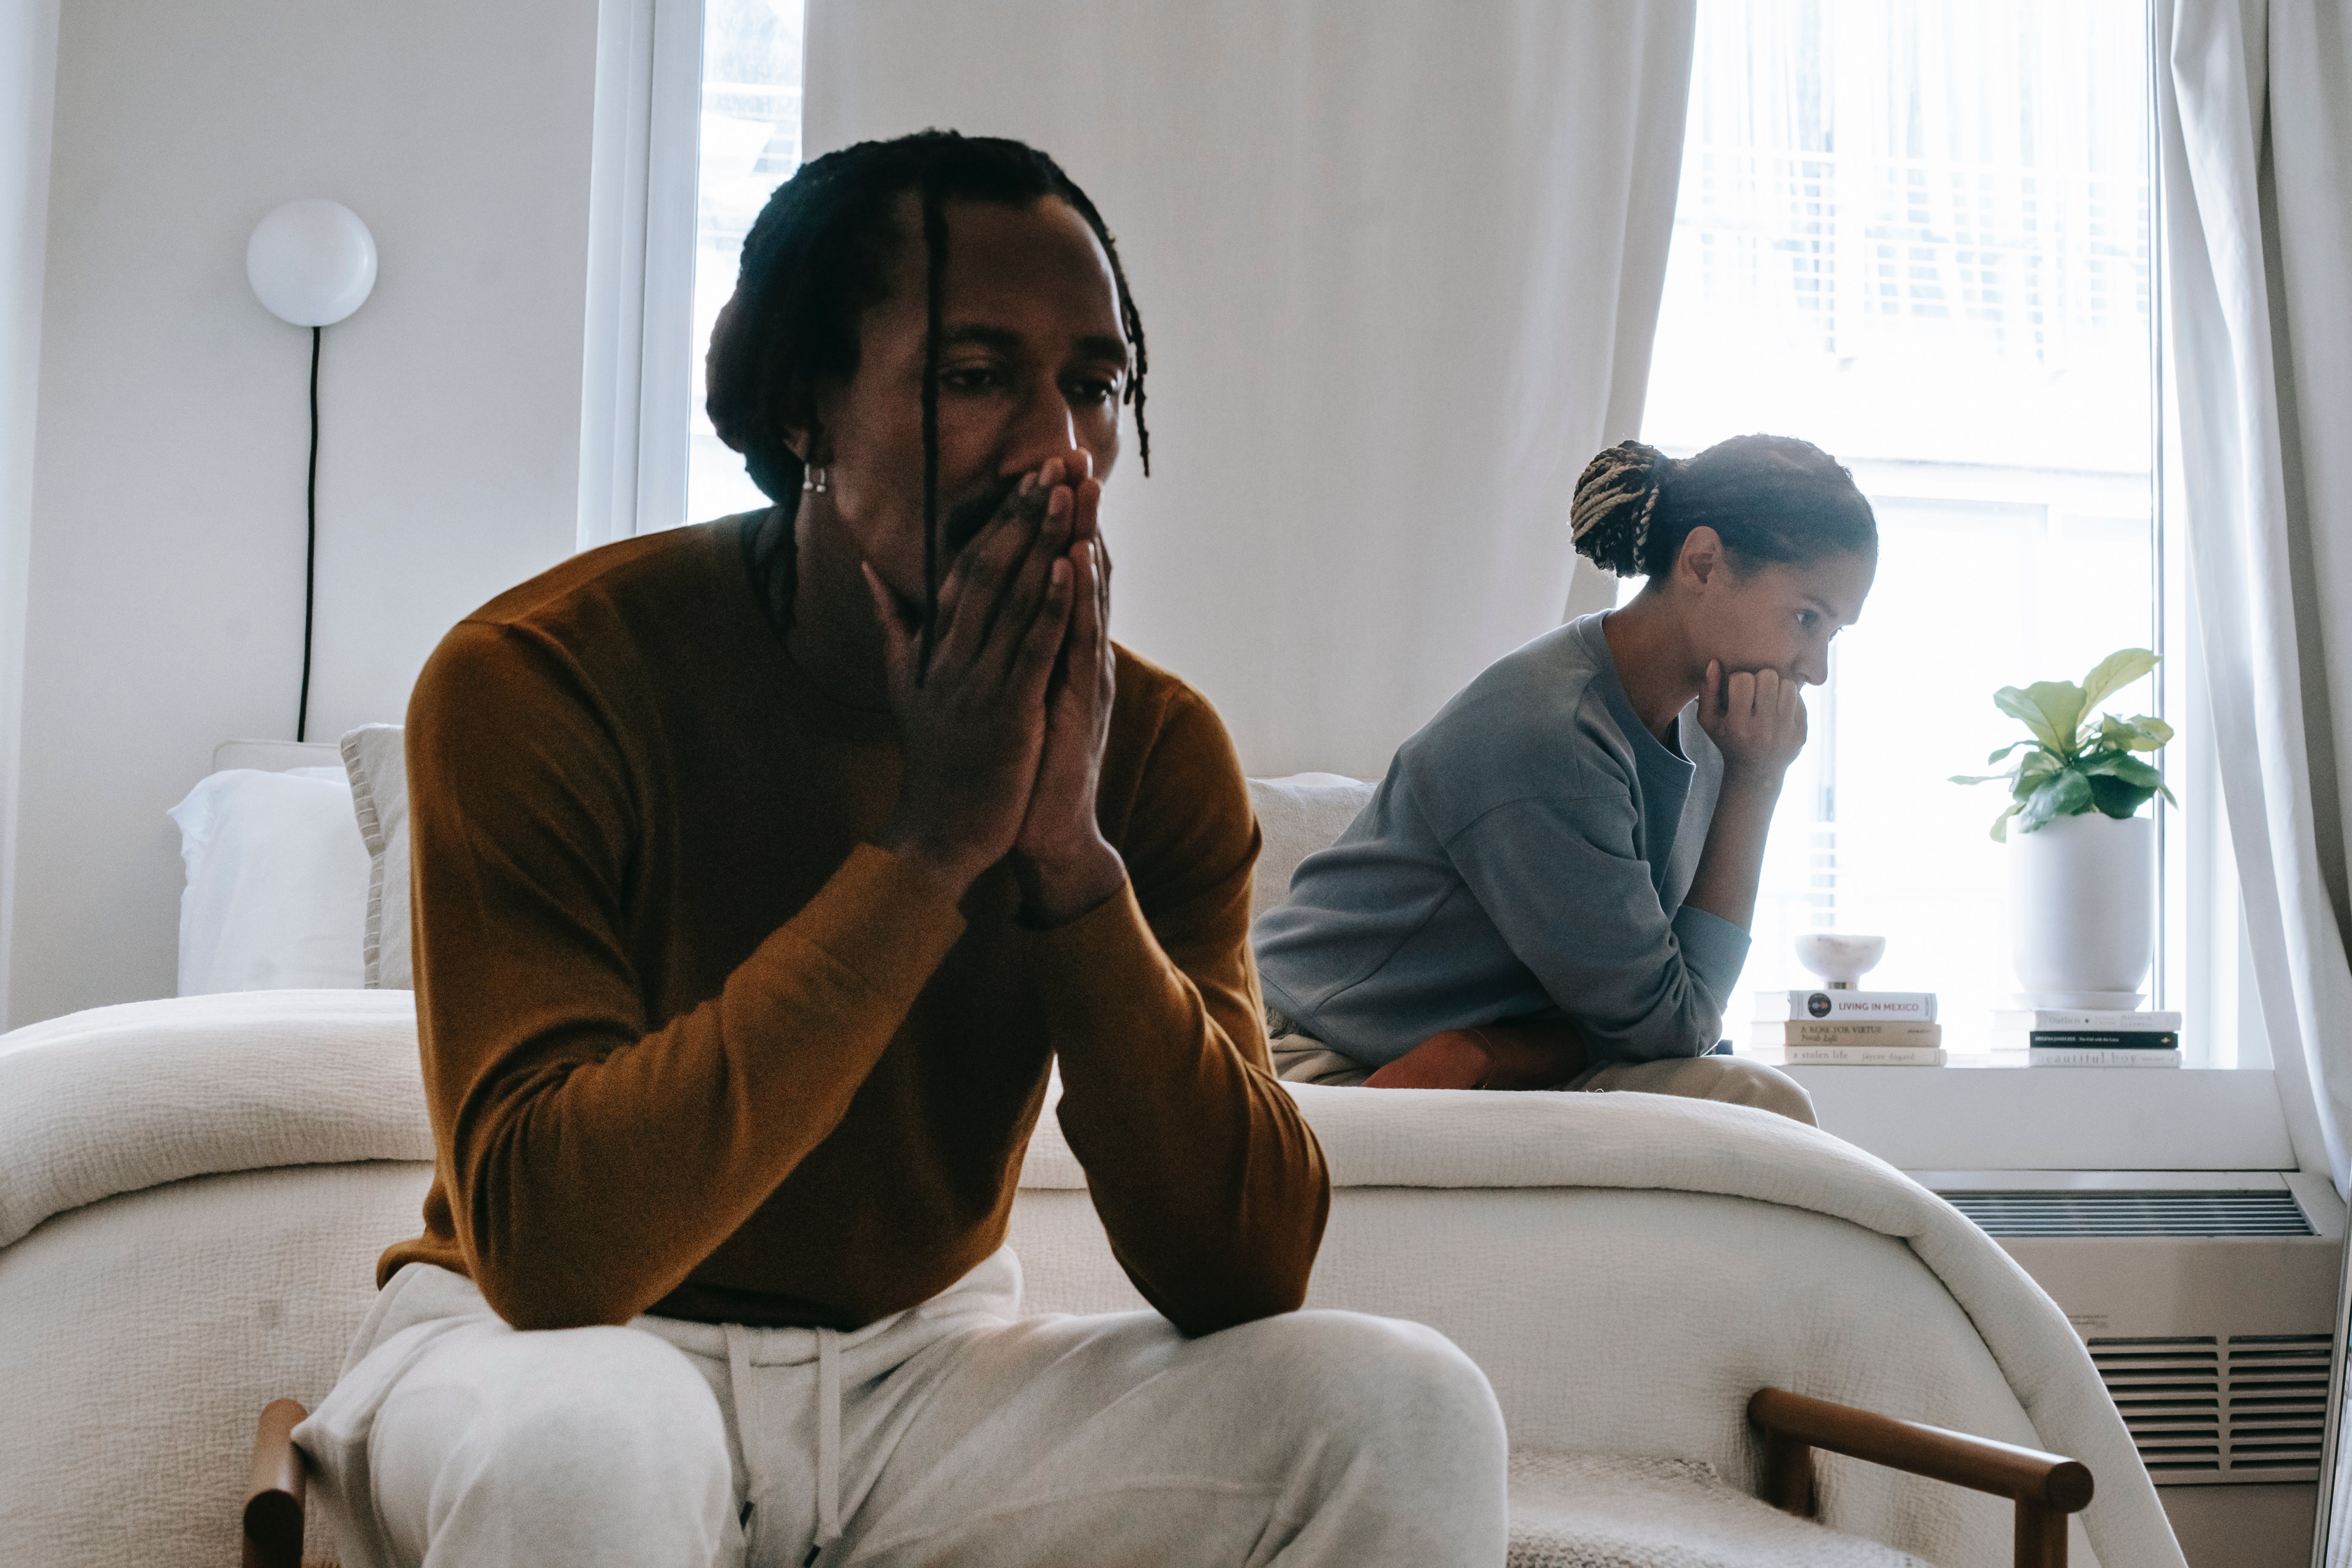 A couple sitting apart in the bedroom┃Source: Pexels